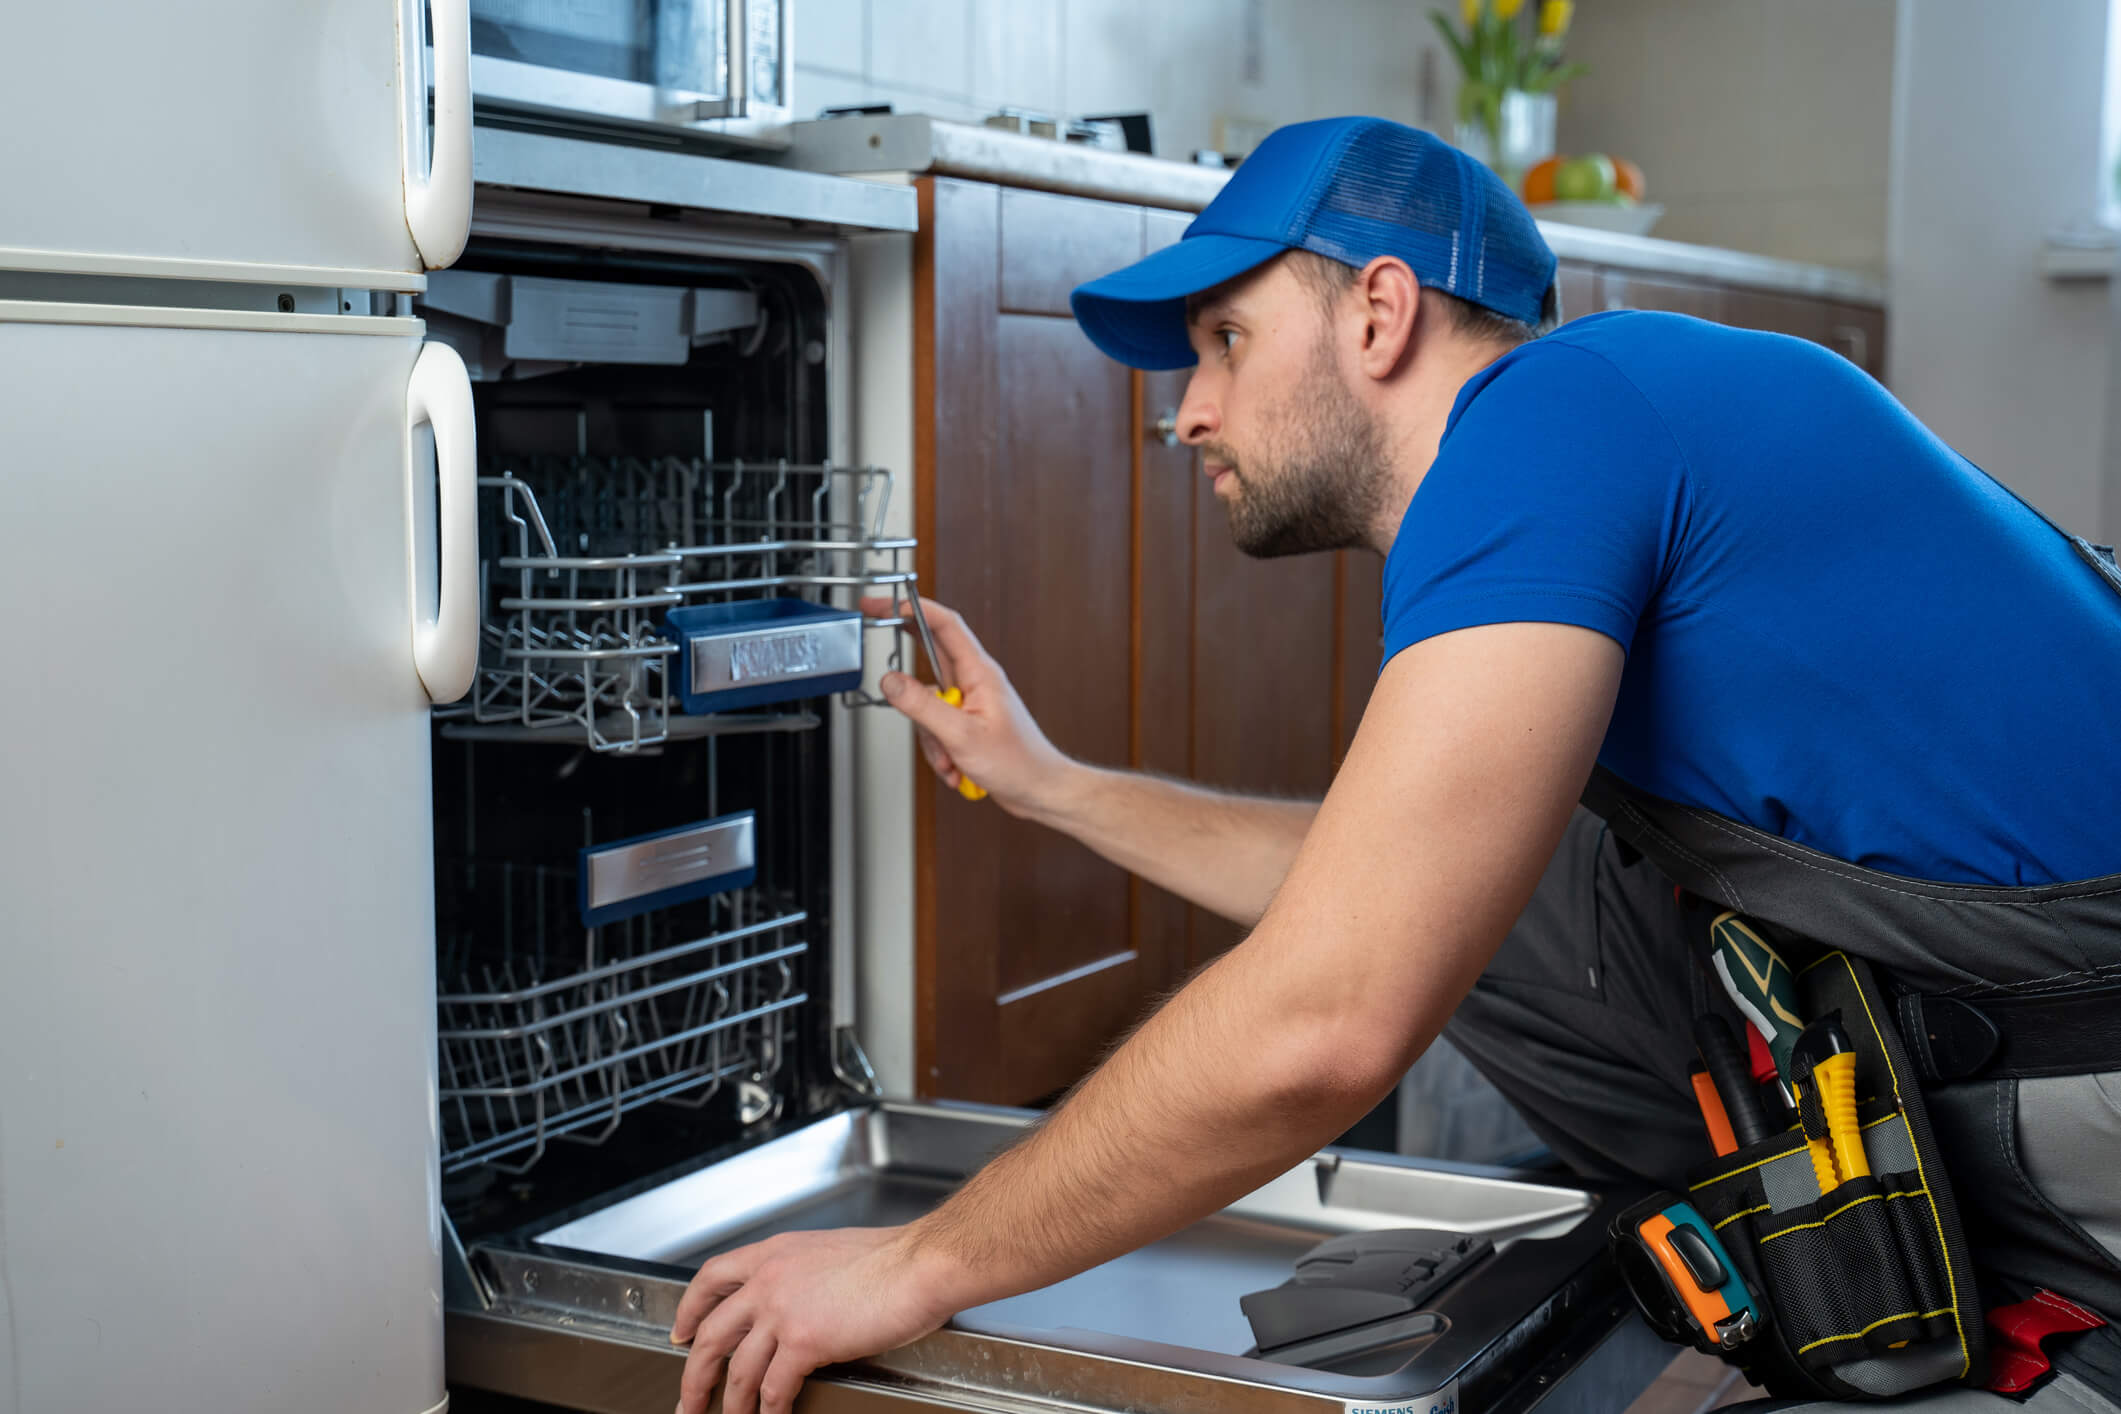 How To Replace Dishwasher